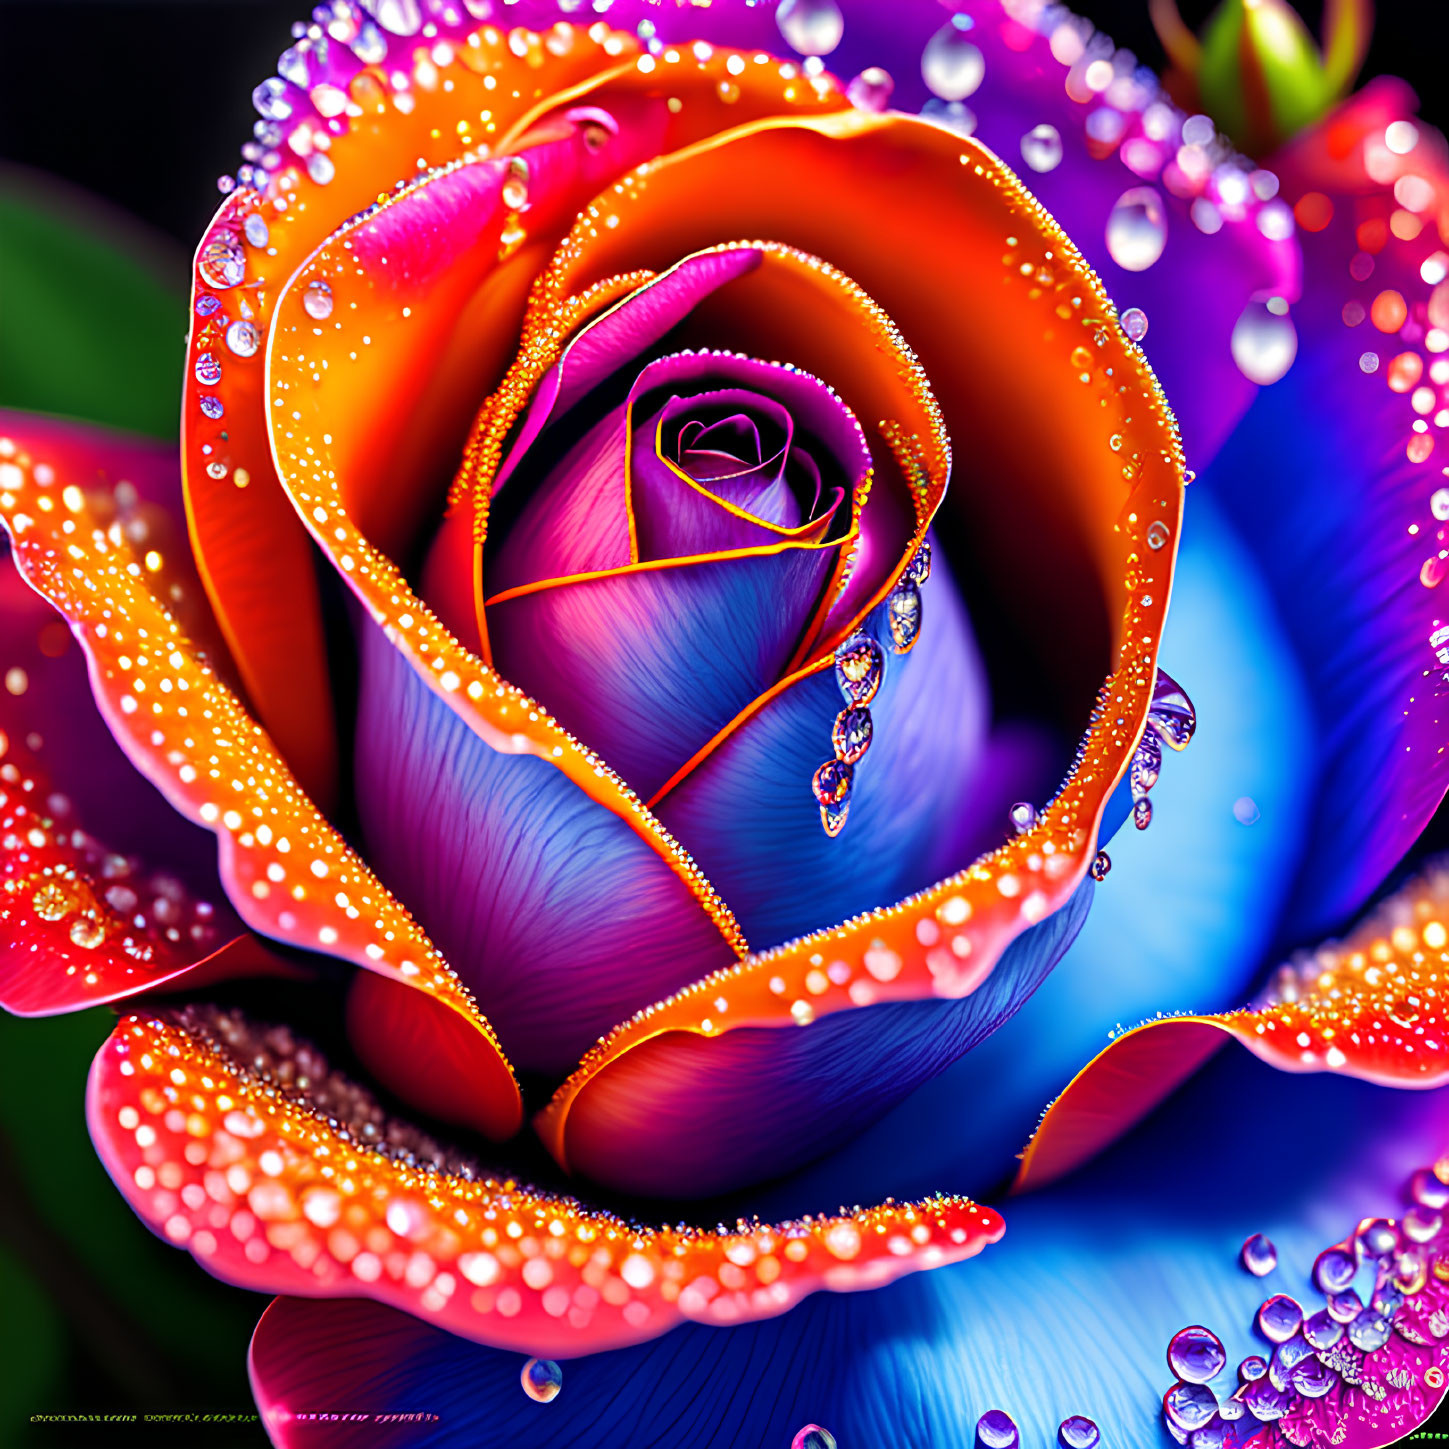 Colorful Rose with Dewdrops on Dark Background